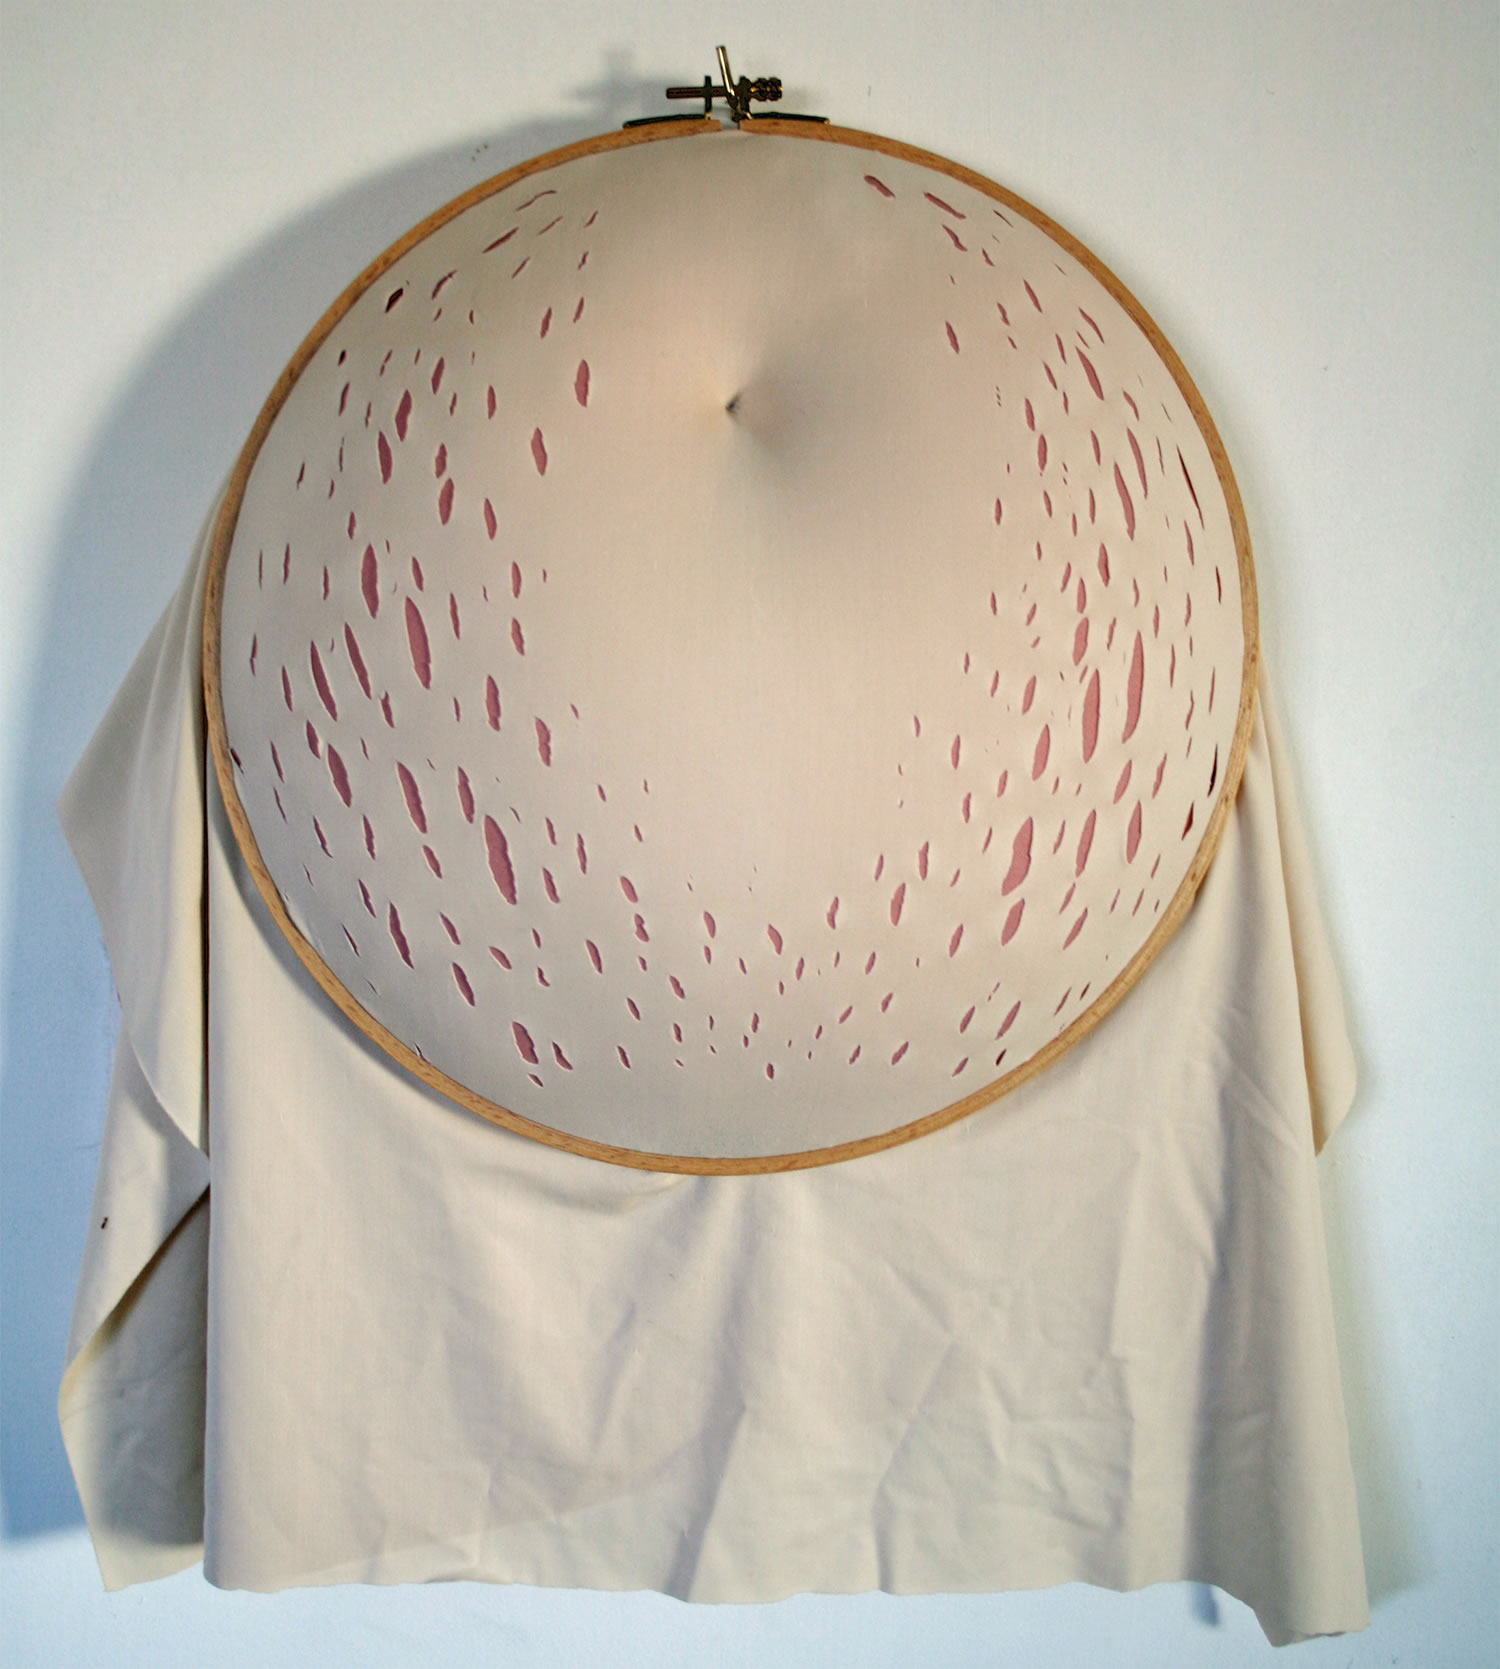 stomach, embroidery